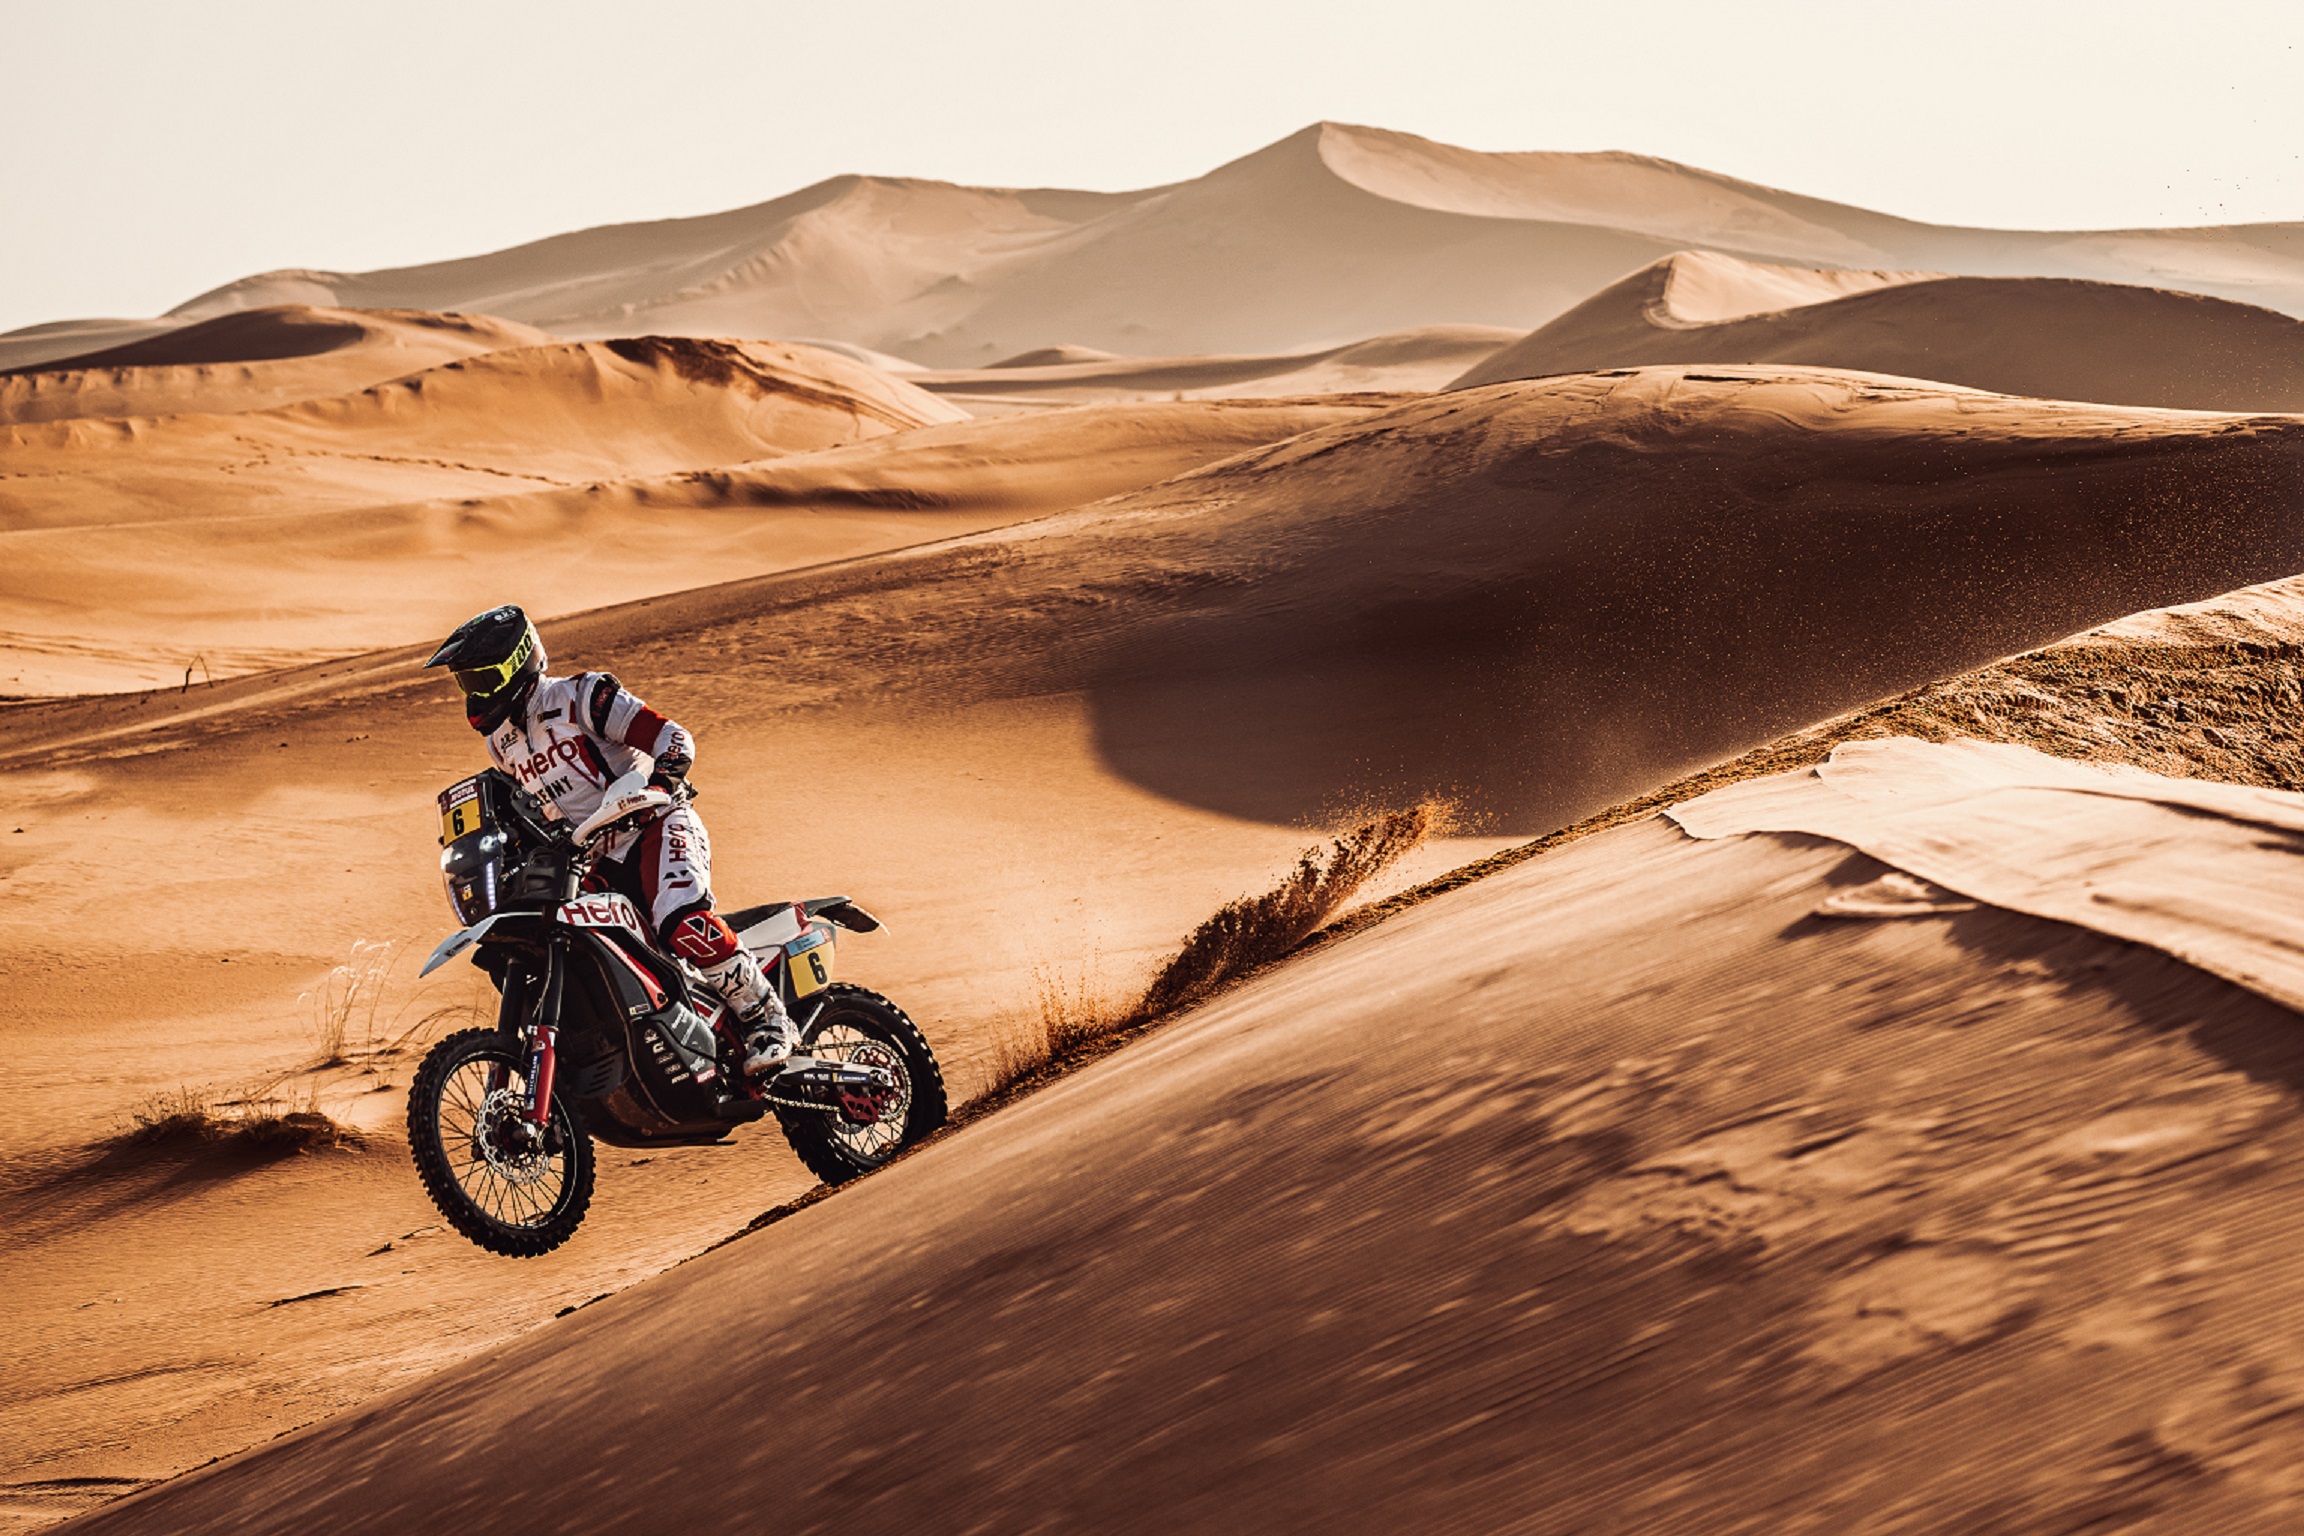 HERO MOTOSPORTS TEAM RALLY CREATES HISTORY  TEAM RIDER JOAQUIM RODRIGUES WINS STAGE 3 AT DAKAR 2022  FIRST INDIAN TEAM AND MANUFACTURER TO WIN A STAGE AT THE DAKAR RALLY